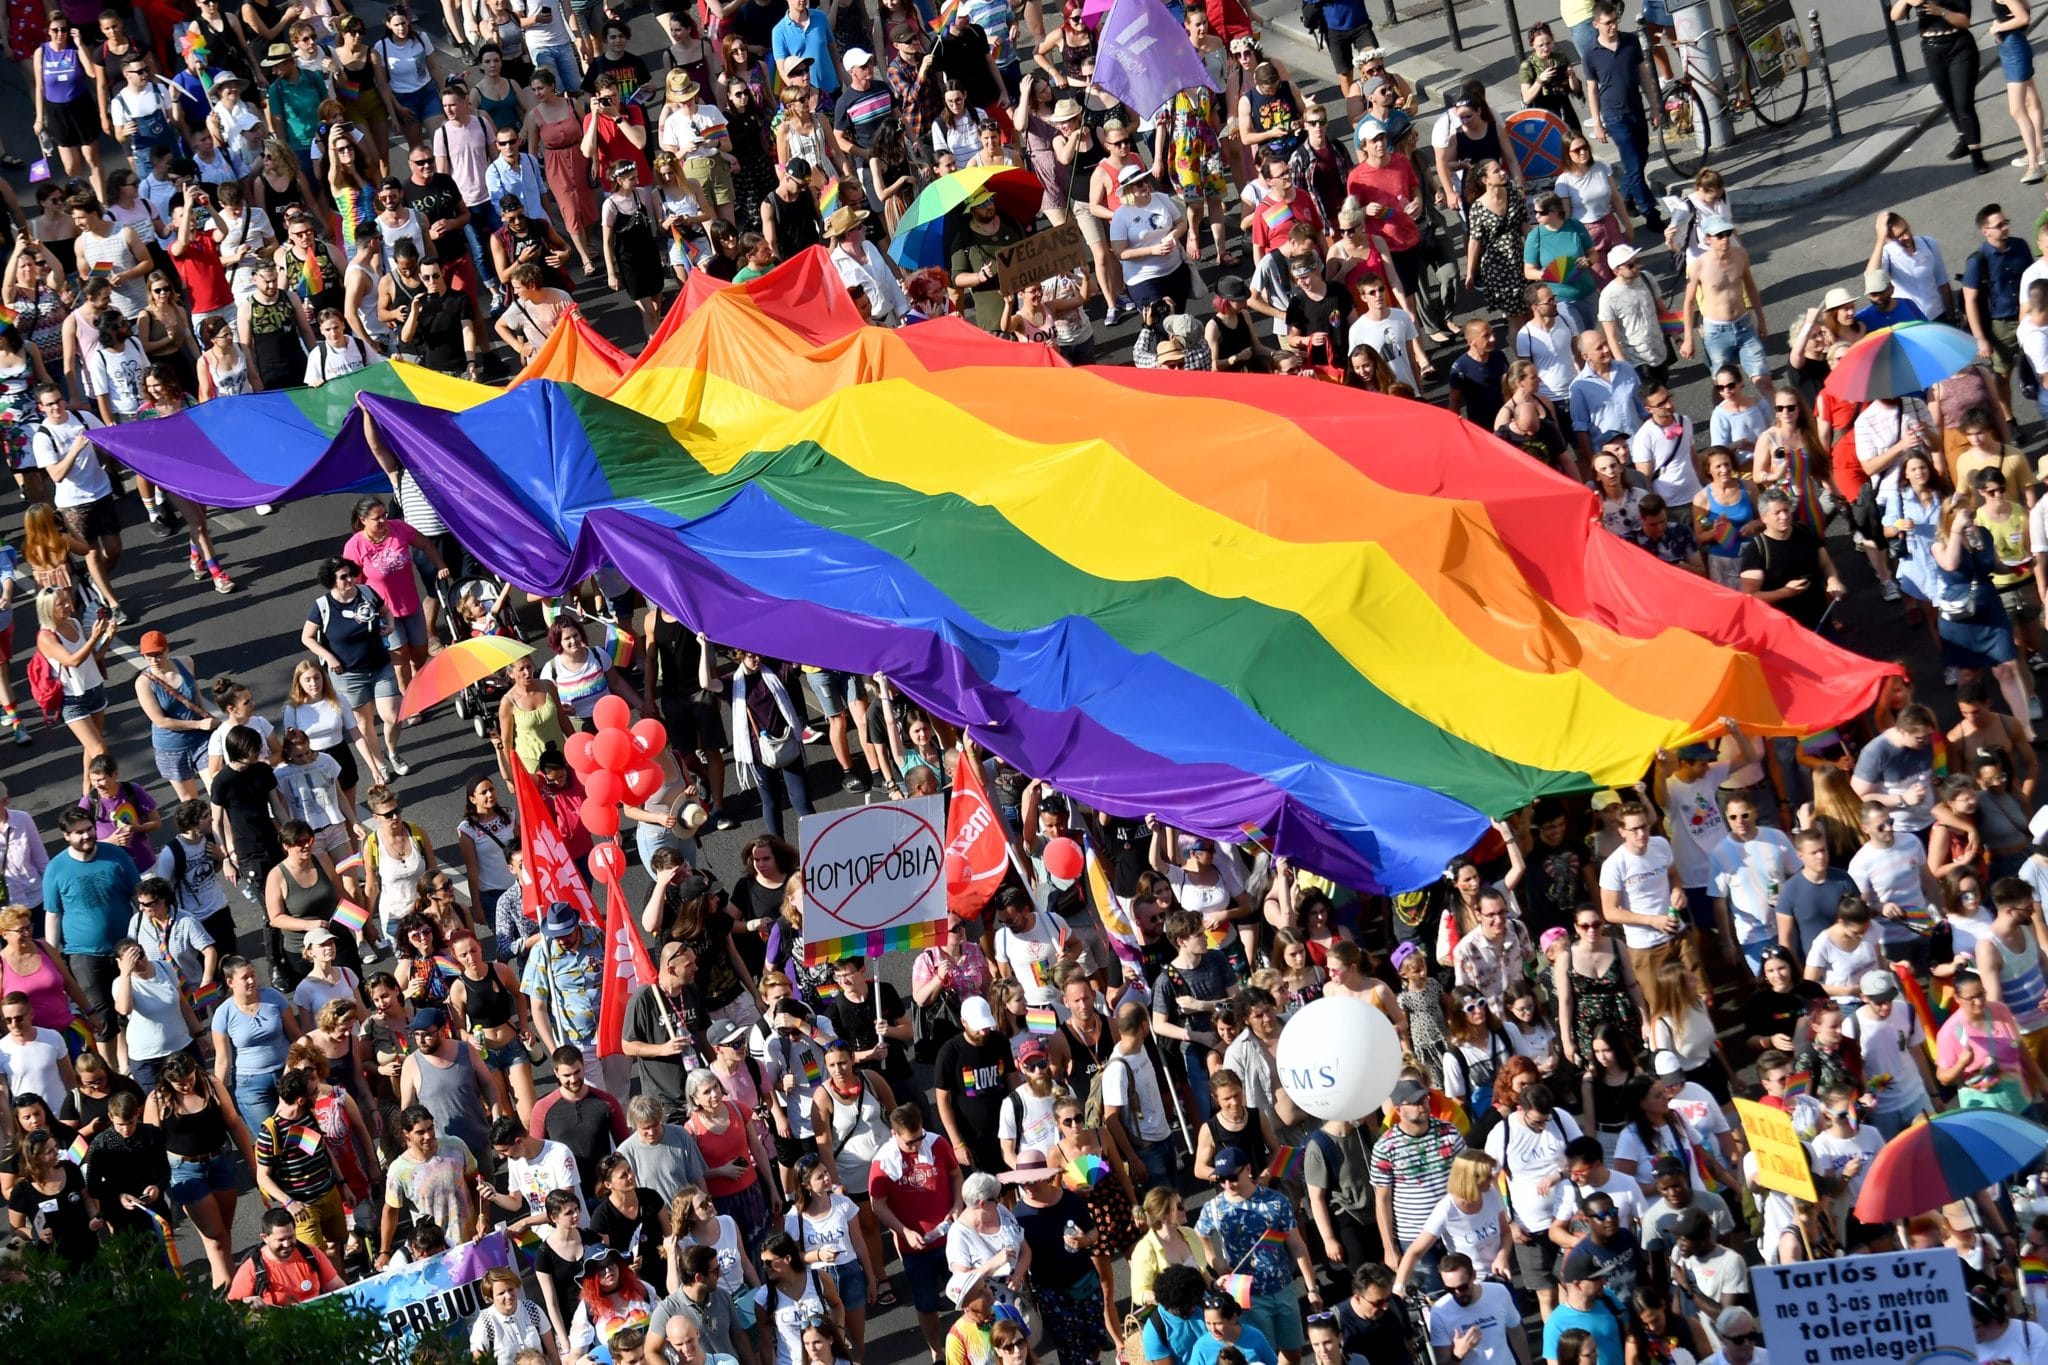 A Pride protest in Budapest, capital of Hungary, in 2019 